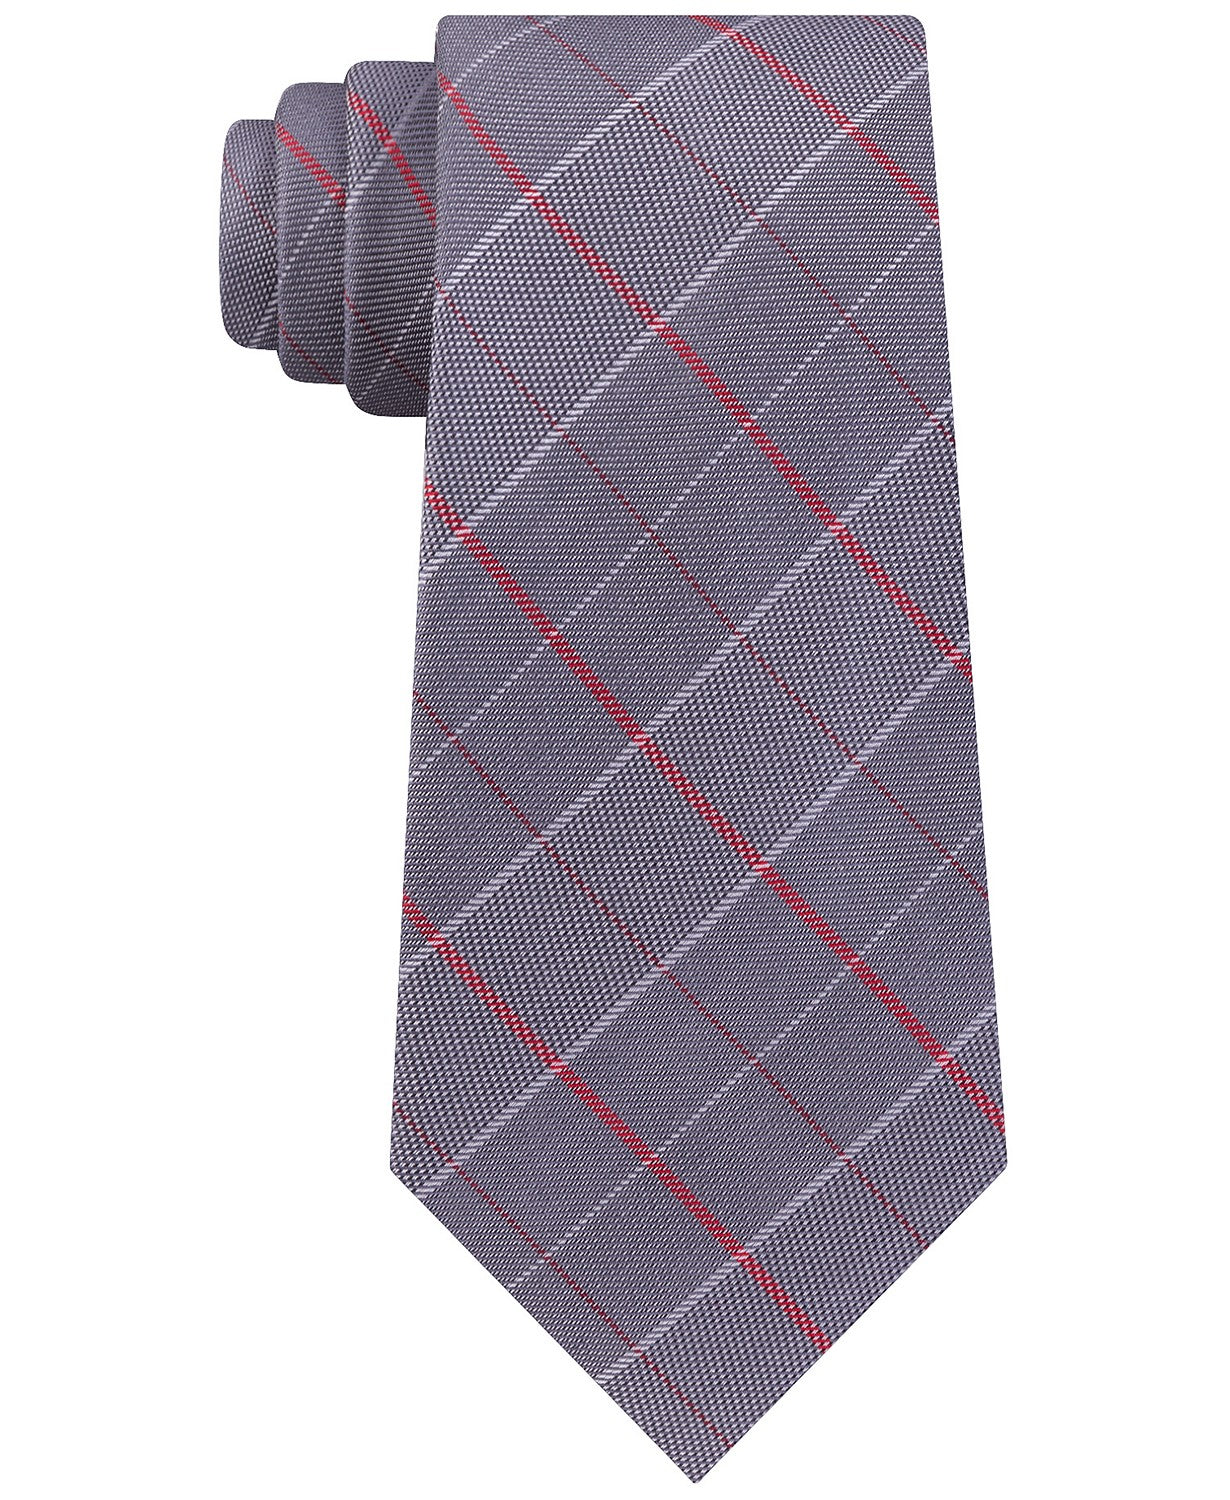 Calvin Klein, Perry Ellis, and Tommy Hilfiger Ties [3 for $29]